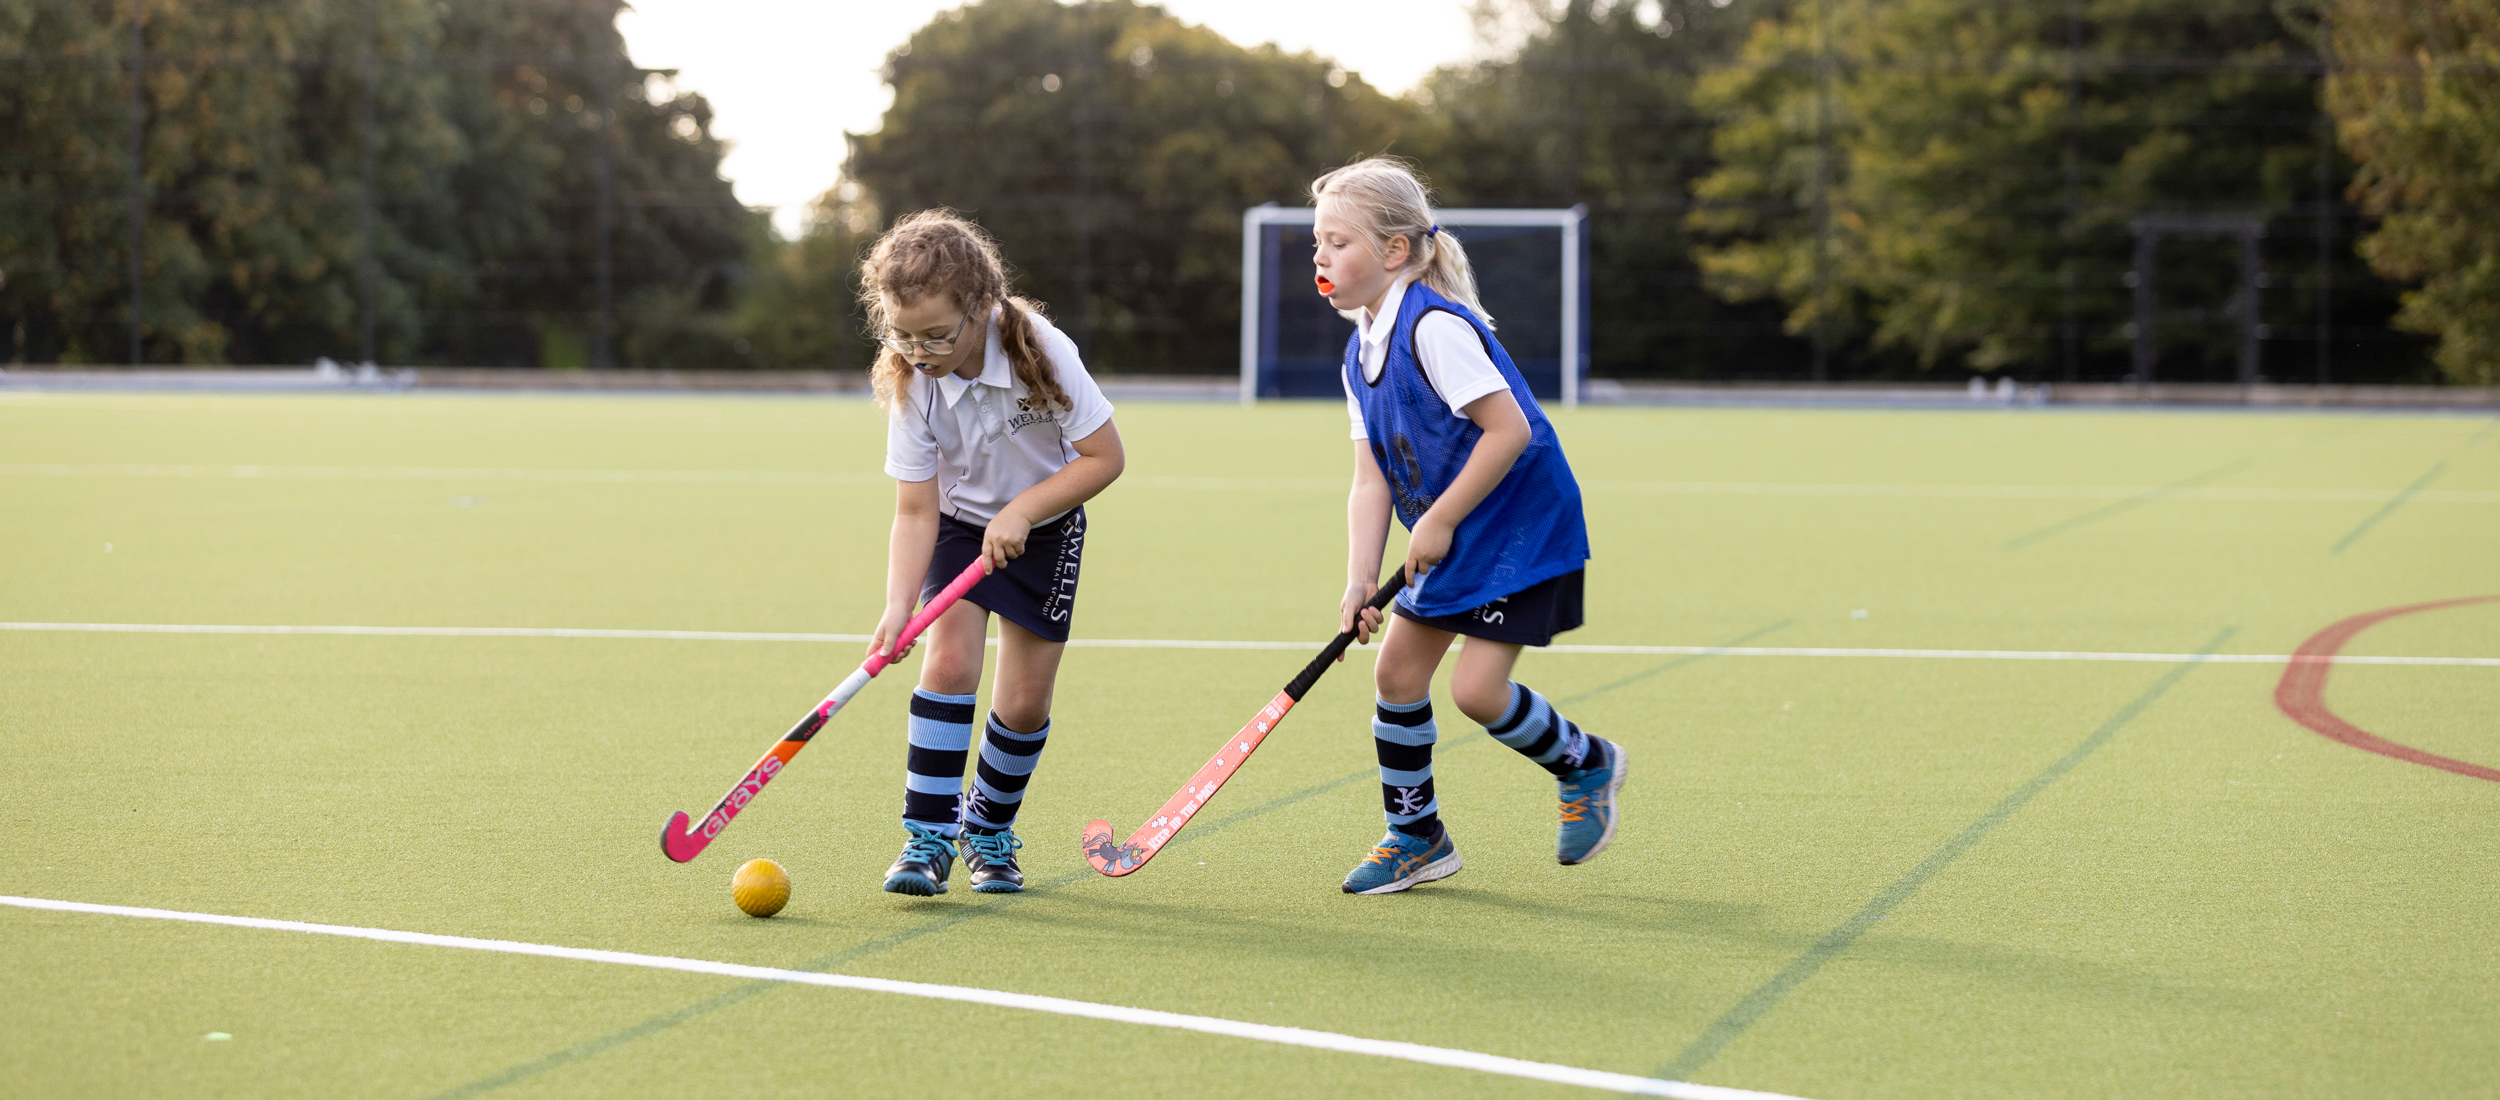 Prep School girls playing hockey at our Independent Prep School in Wells, Somerset